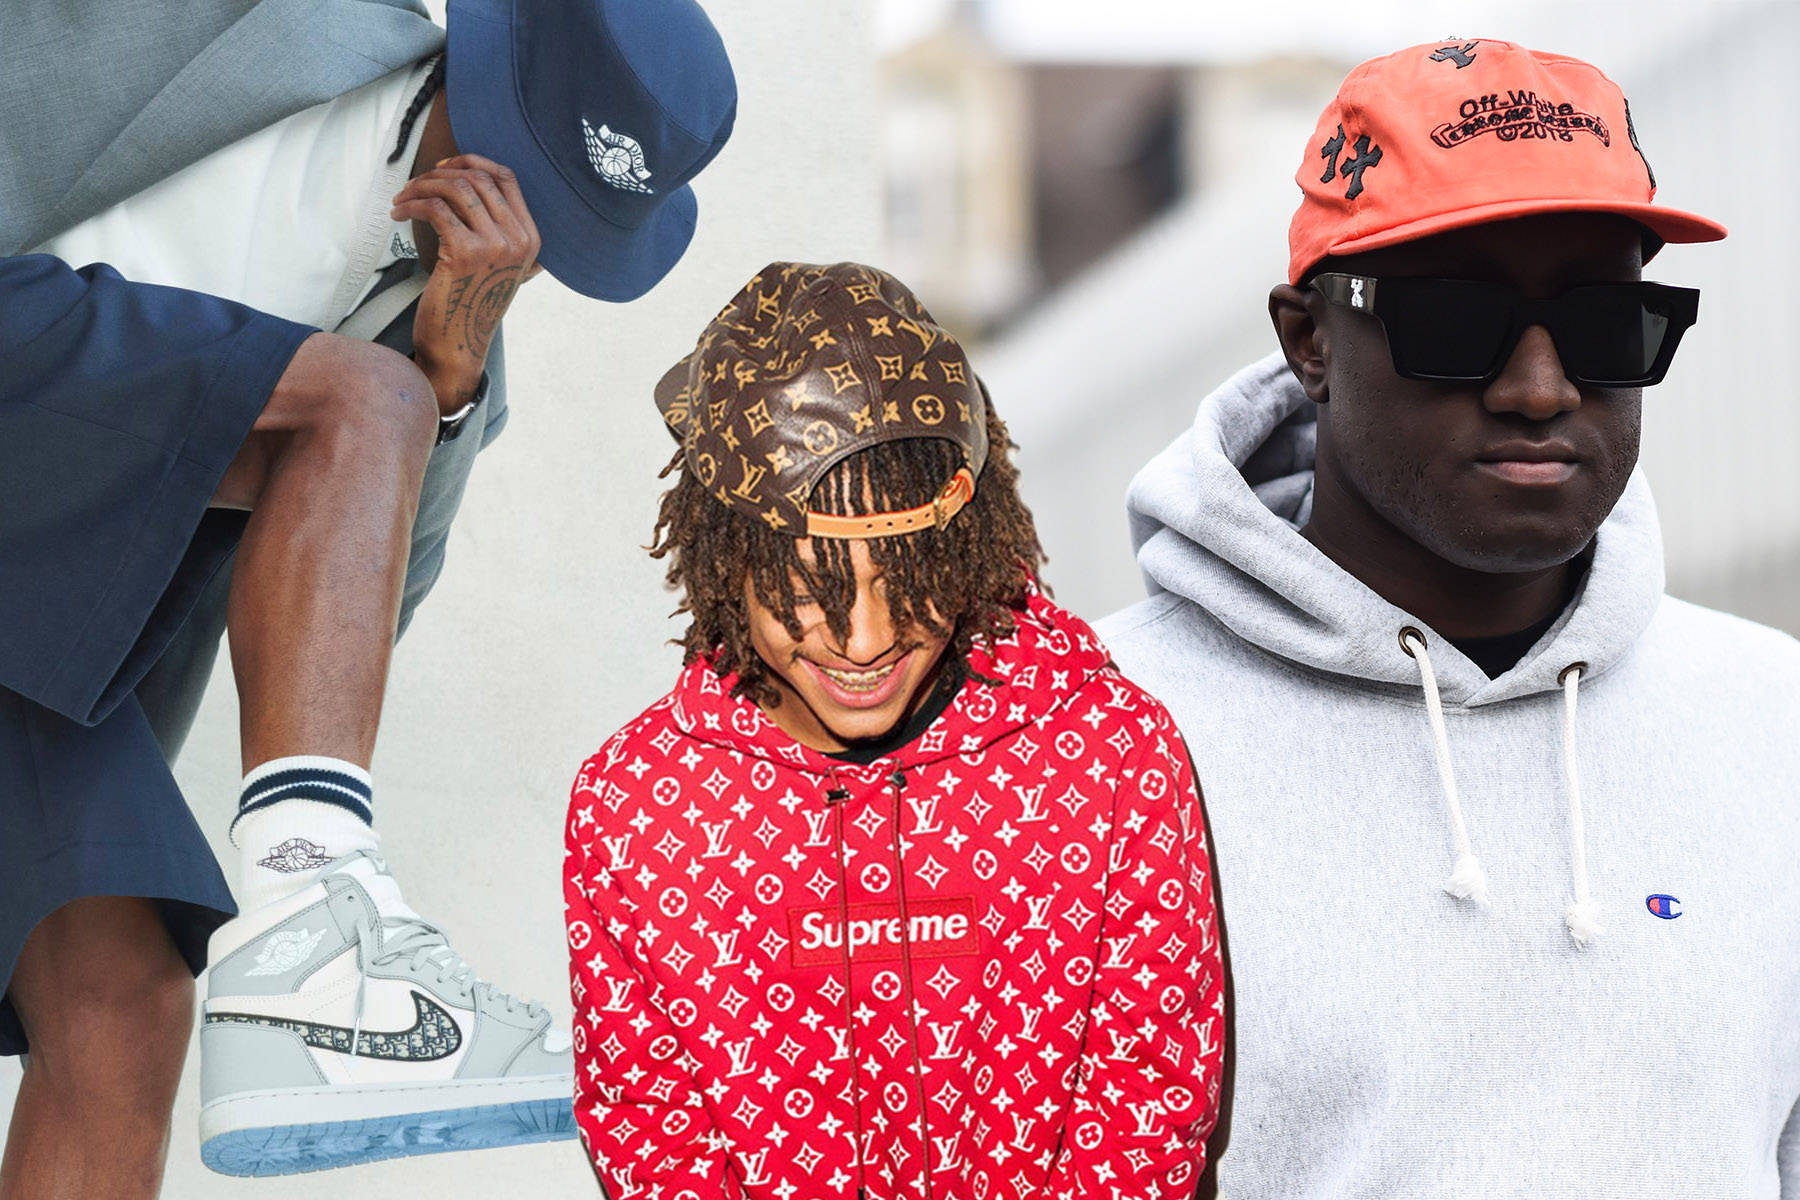 How streetwear became status symbols for millennials and Gen Zs